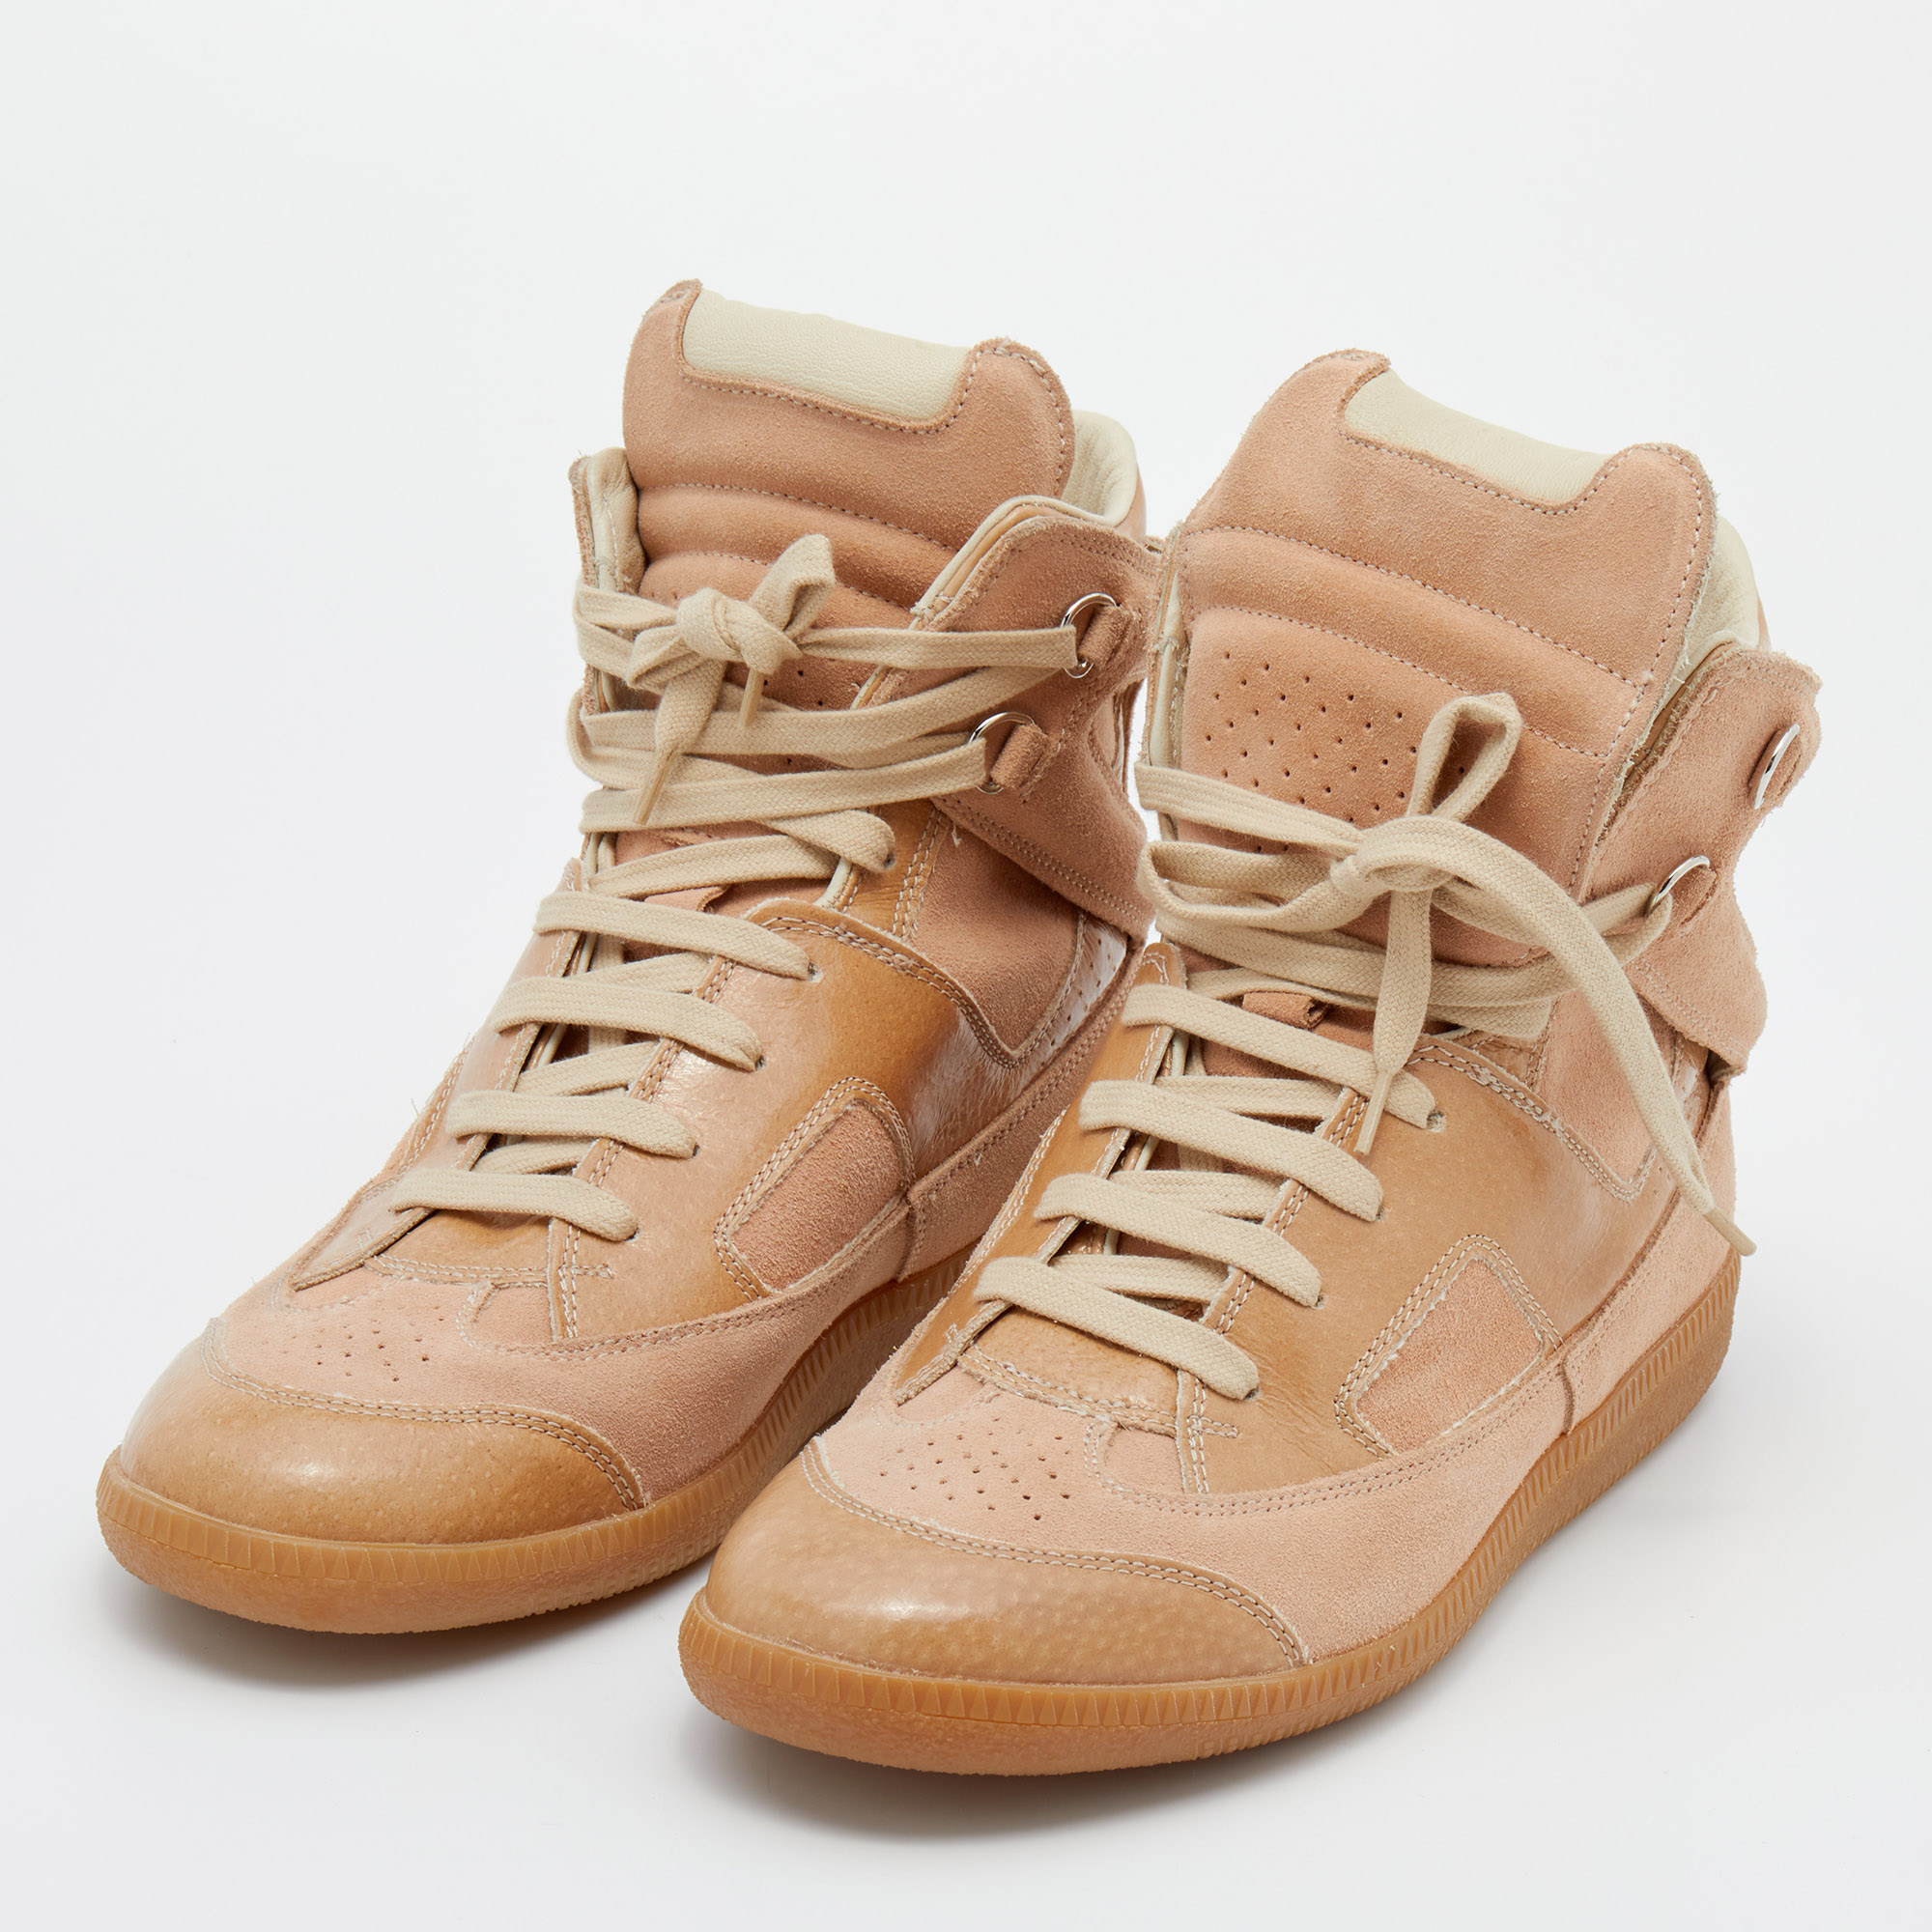 

Maison Martin Margiela Nude Pink/Beige Suede And Leather Insert High Top Sneakers Size